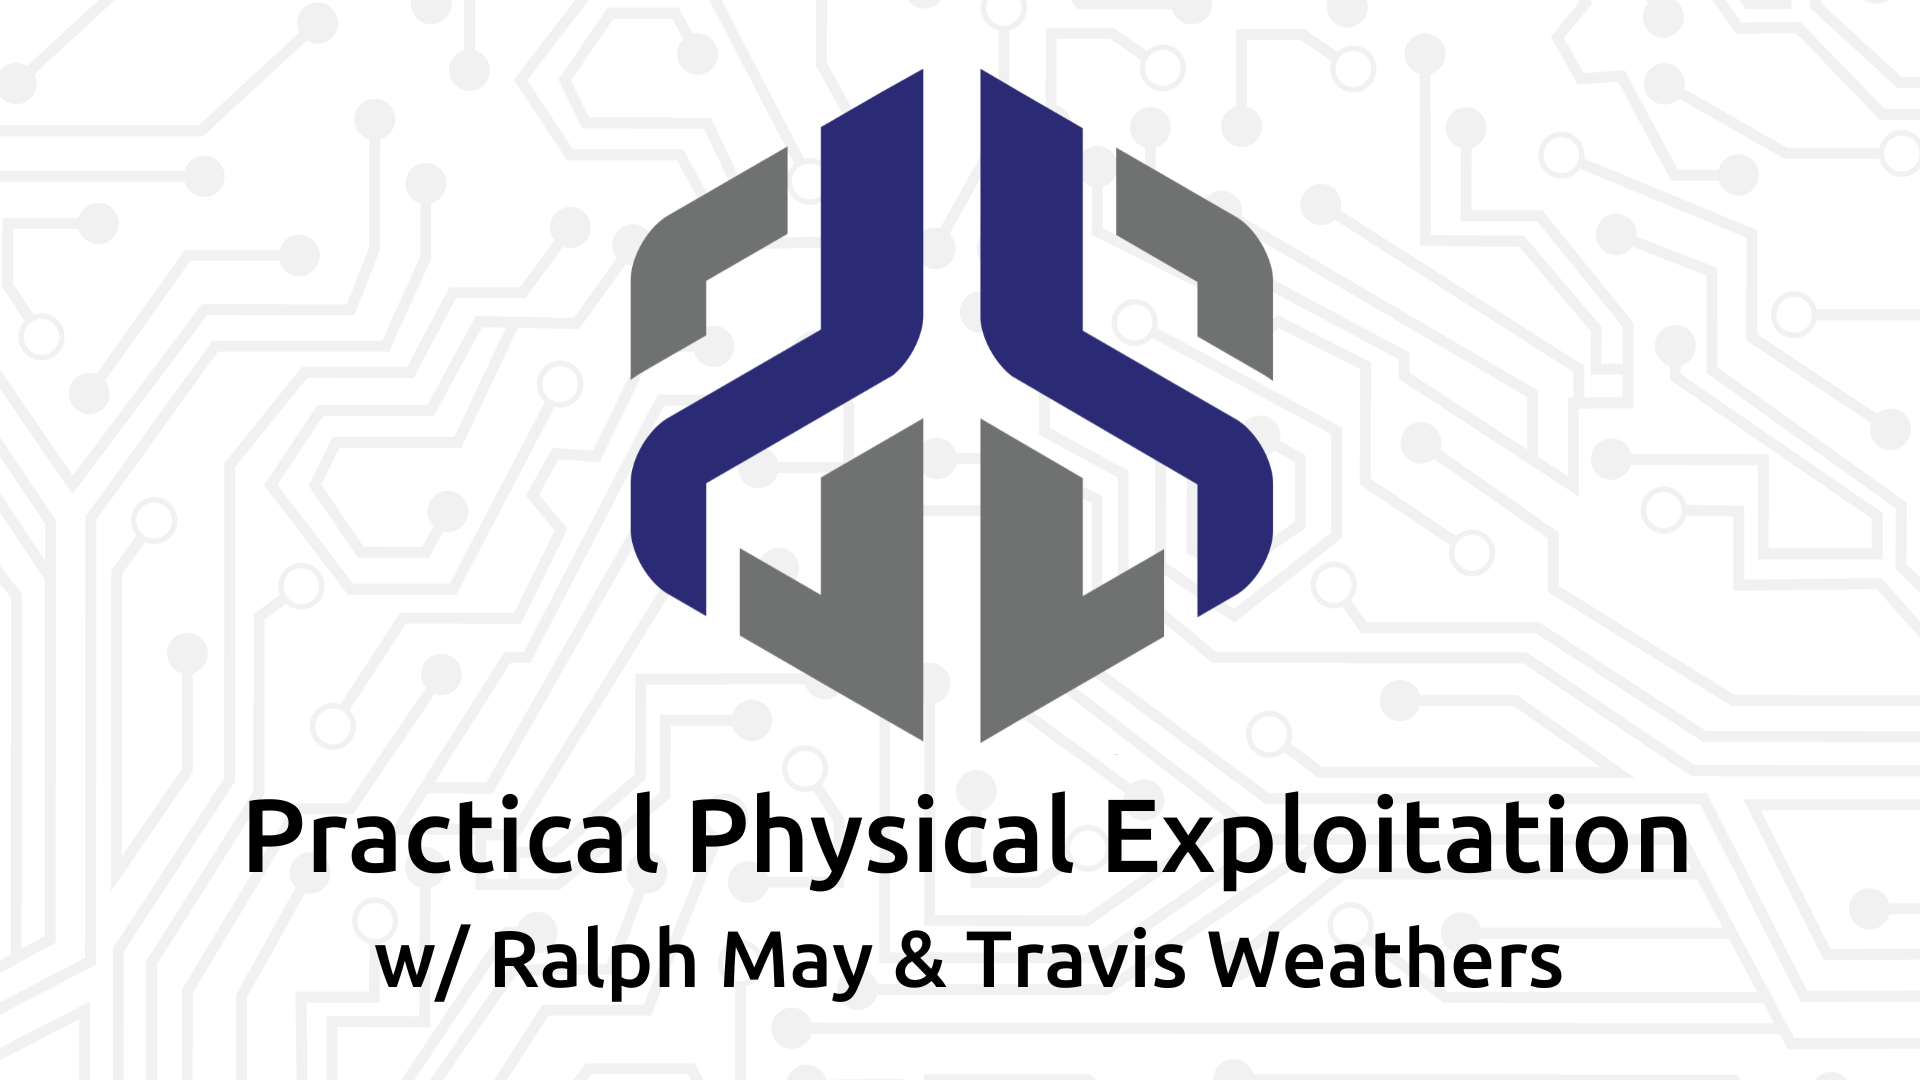 Practical Physical Exploitation w/ Ralph May and Travis Weathers